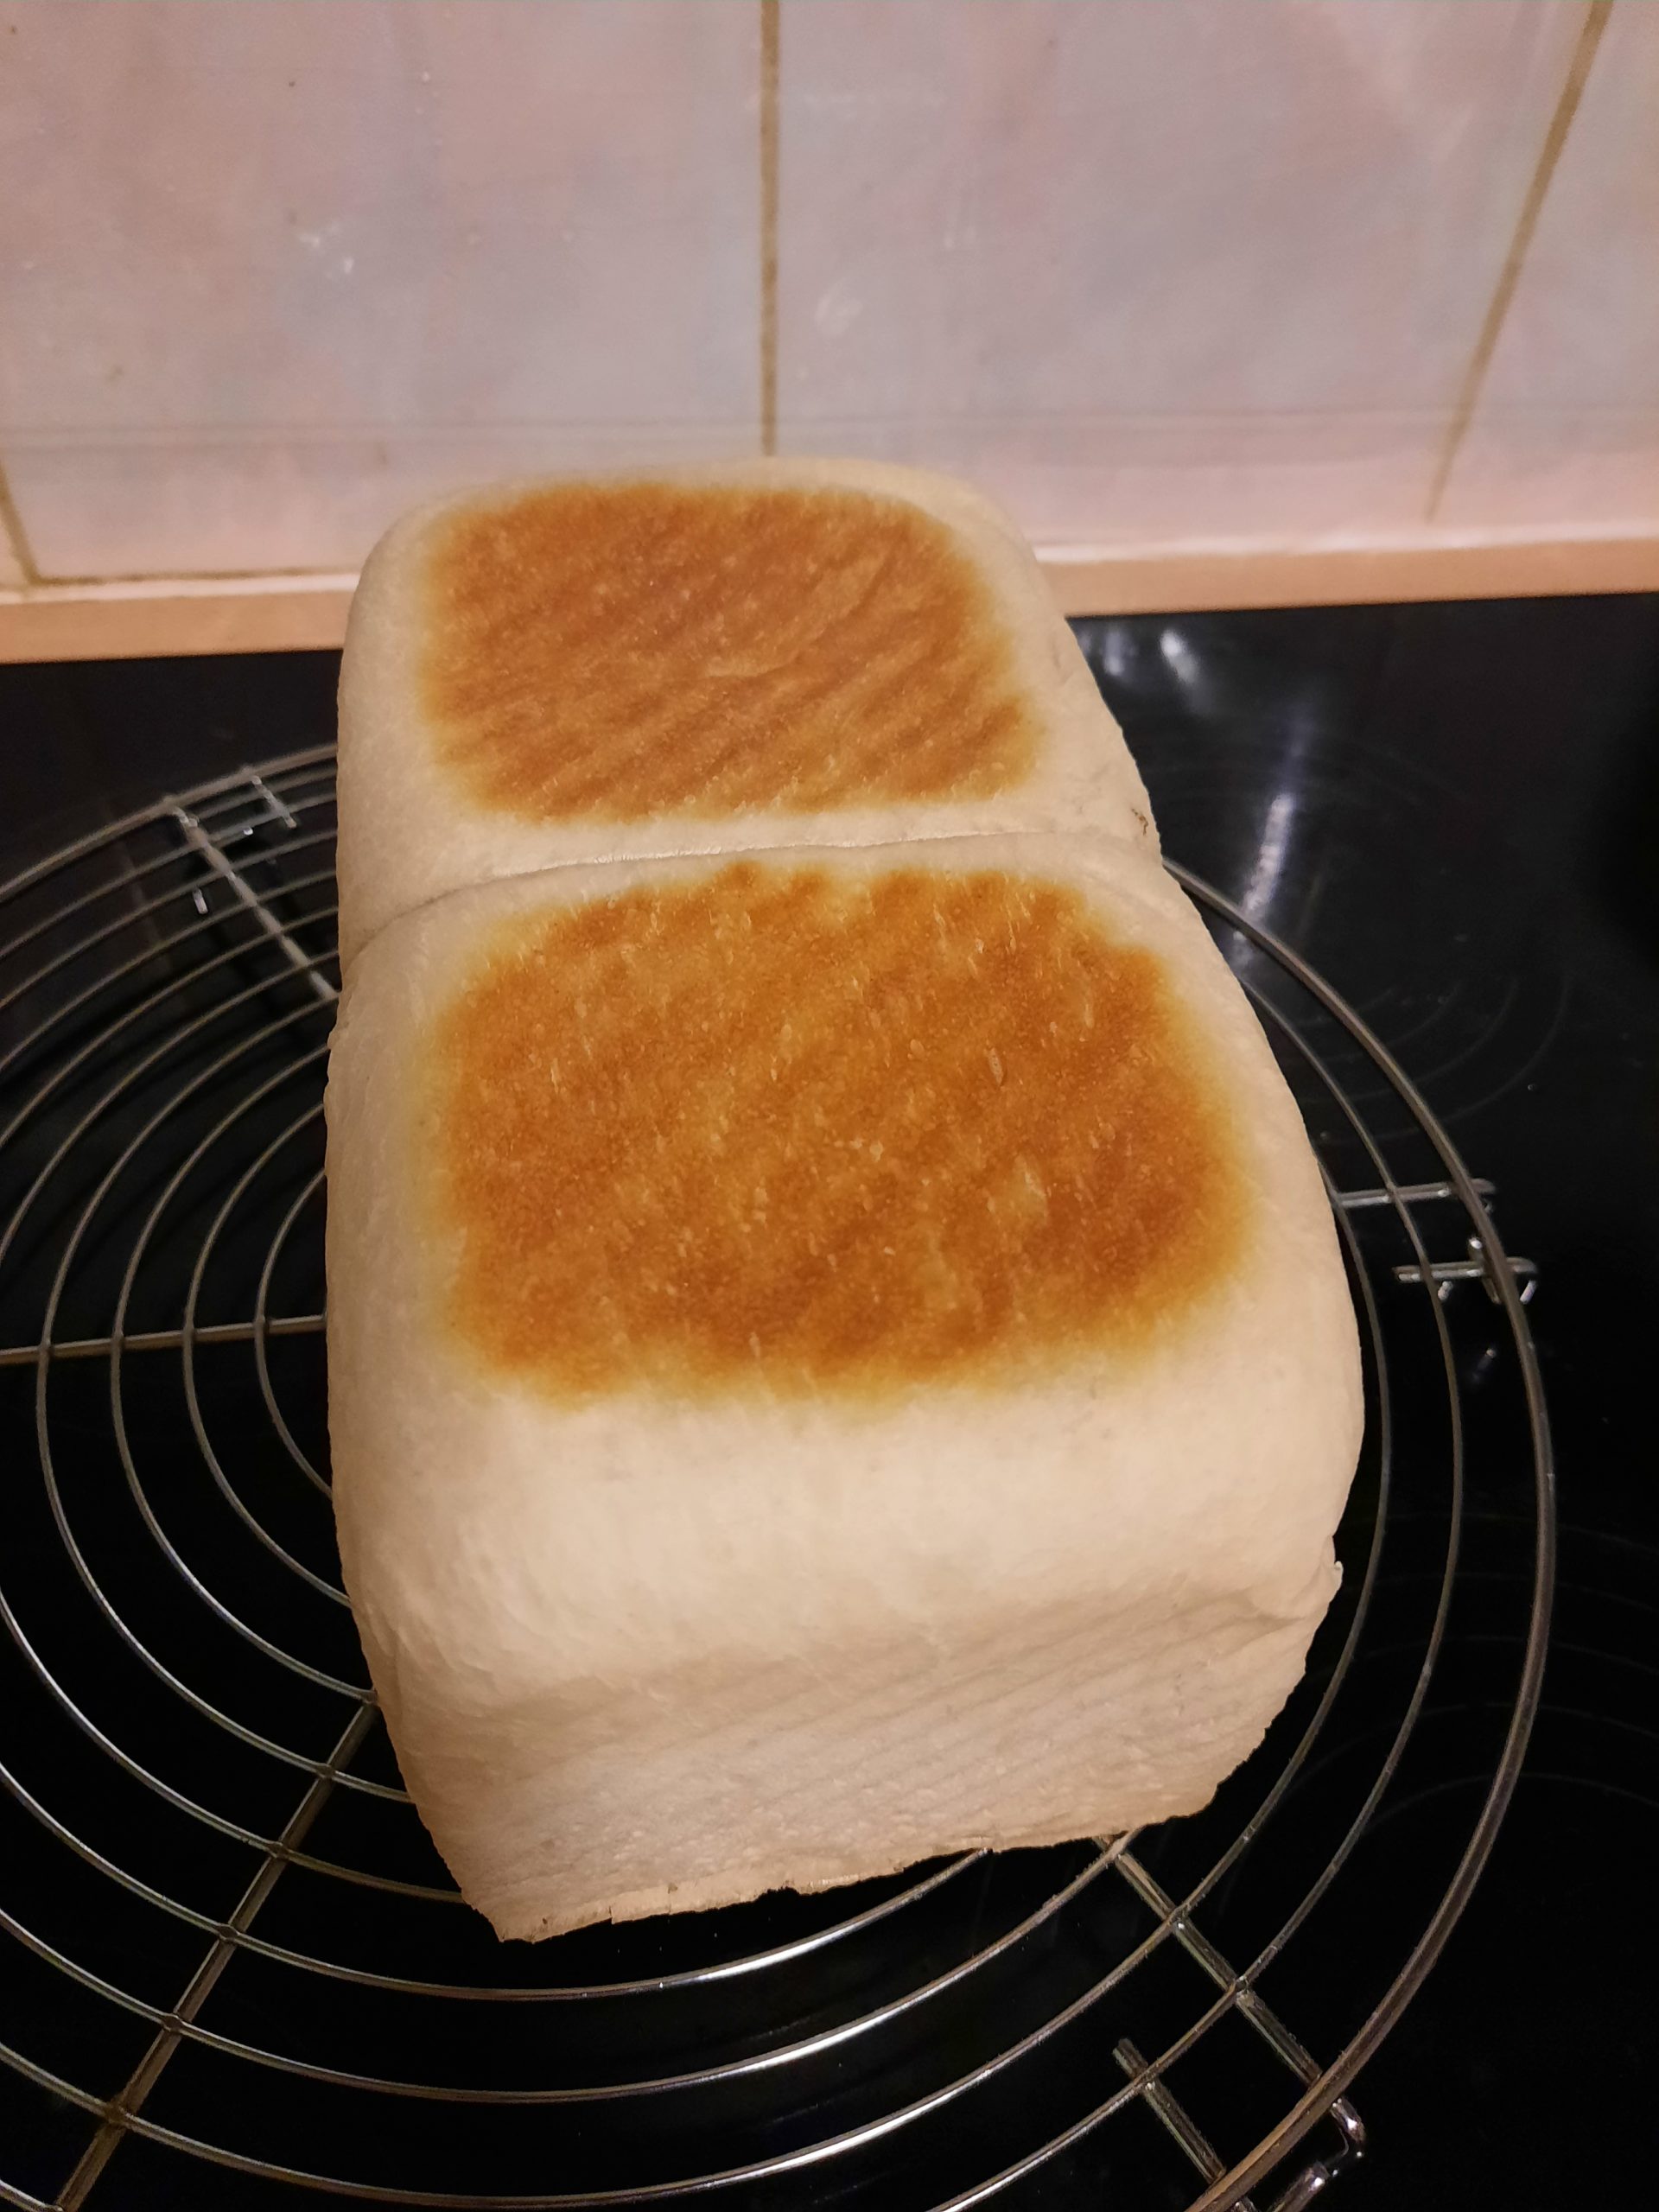 The second baked toast was successful but not perfect because the color was too white